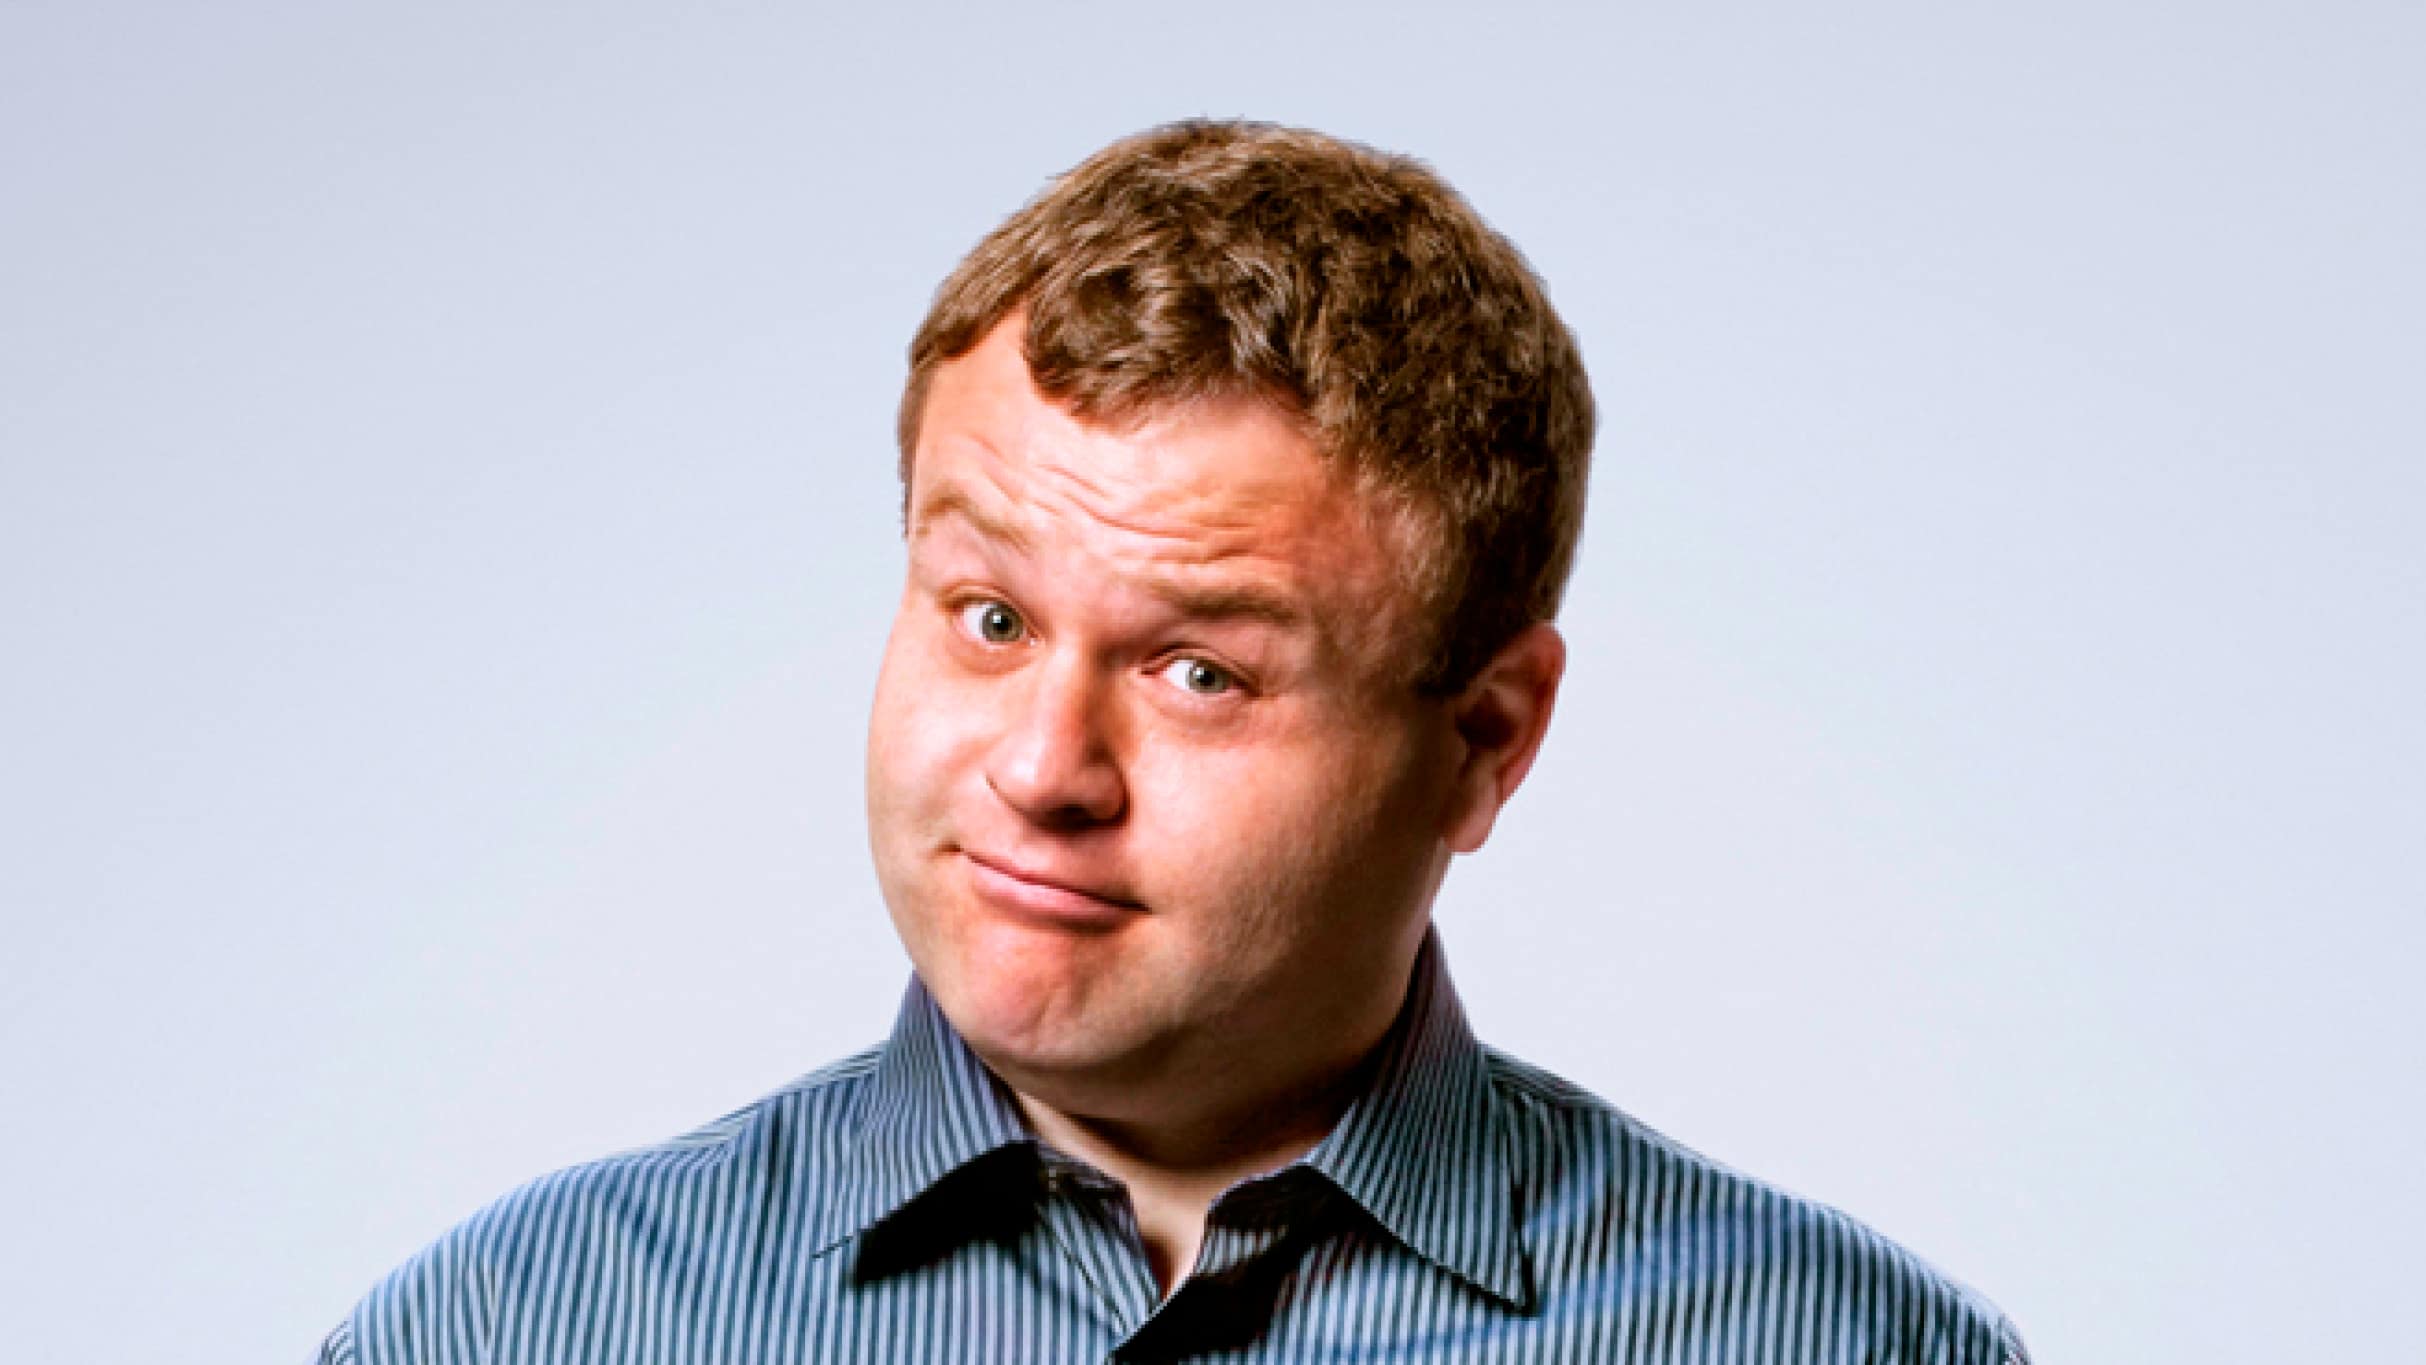 Frank Caliendo wsg Rick Mahorn sponsored by OSEF free presale pa55w0rd for early tickets in Detroit